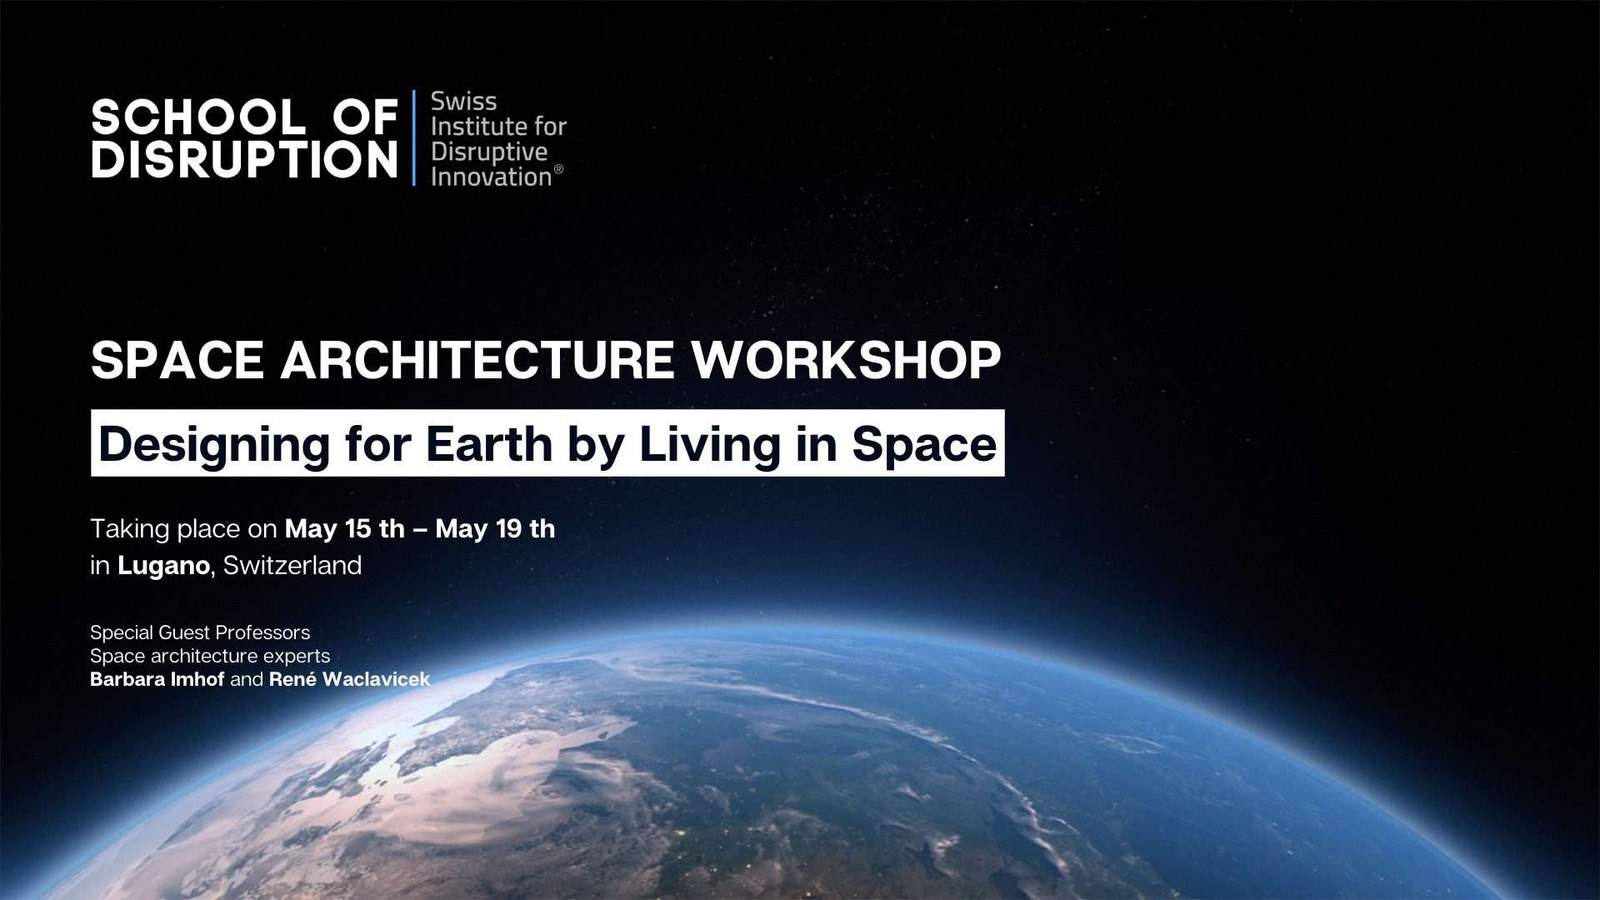 Space Architecture Workshop – Designing for Earth by Living in Space